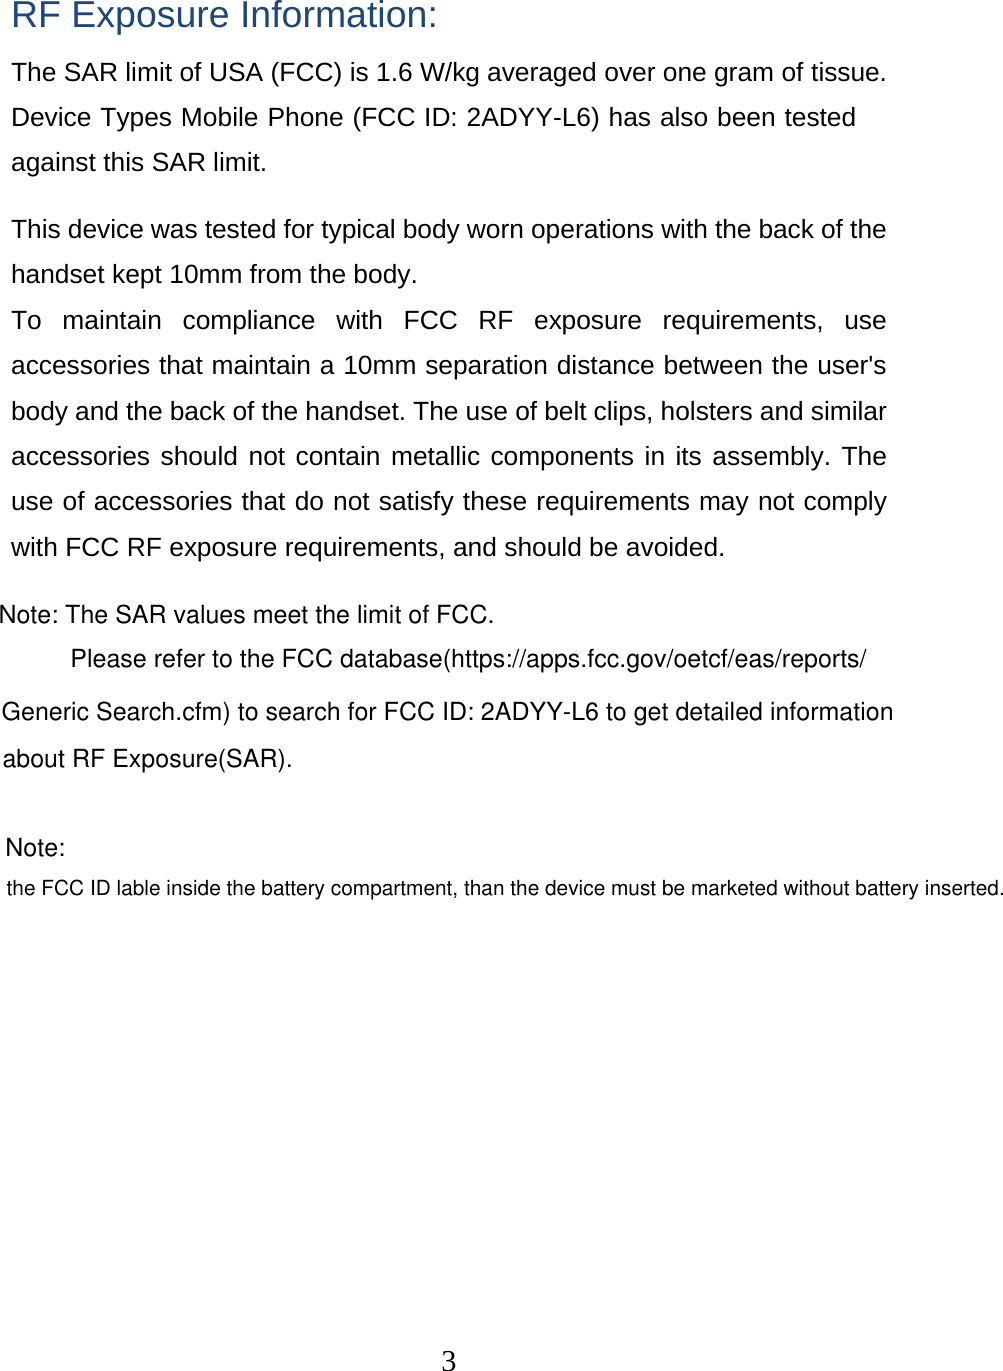  3 RF Exposure Information: The SAR limit of USA (FCC) is 1.6 W/kg averaged over one gram of tissue. Device Types Mobile Phone (FCC ID: 2ADYY-L6) has also been tested against this SAR limit. This device was tested for typical body worn operations with the back of the handset kept 10mm from the body. To maintain compliance with FCC RF exposure requirements, use accessories that maintain a 10mm separation distance between the user&apos;s body and the back of the handset. The use of belt clips, holsters and similar accessories should not contain metallic components in its assembly. The use of accessories that do not satisfy these requirements may not comply with FCC RF exposure requirements, and should be avoided. Note: The SAR values meet the limit of FCC.Please refer to the FCC database(https://apps.fcc.gov/oetcf/eas/reports/Generic Search.cfm) to search for FCC ID: 2ADYY-L6 to get detailed informationabout RF Exposure(SAR).Note: the FCC ID lable inside the battery compartment, than the device must be marketed without battery inserted. 